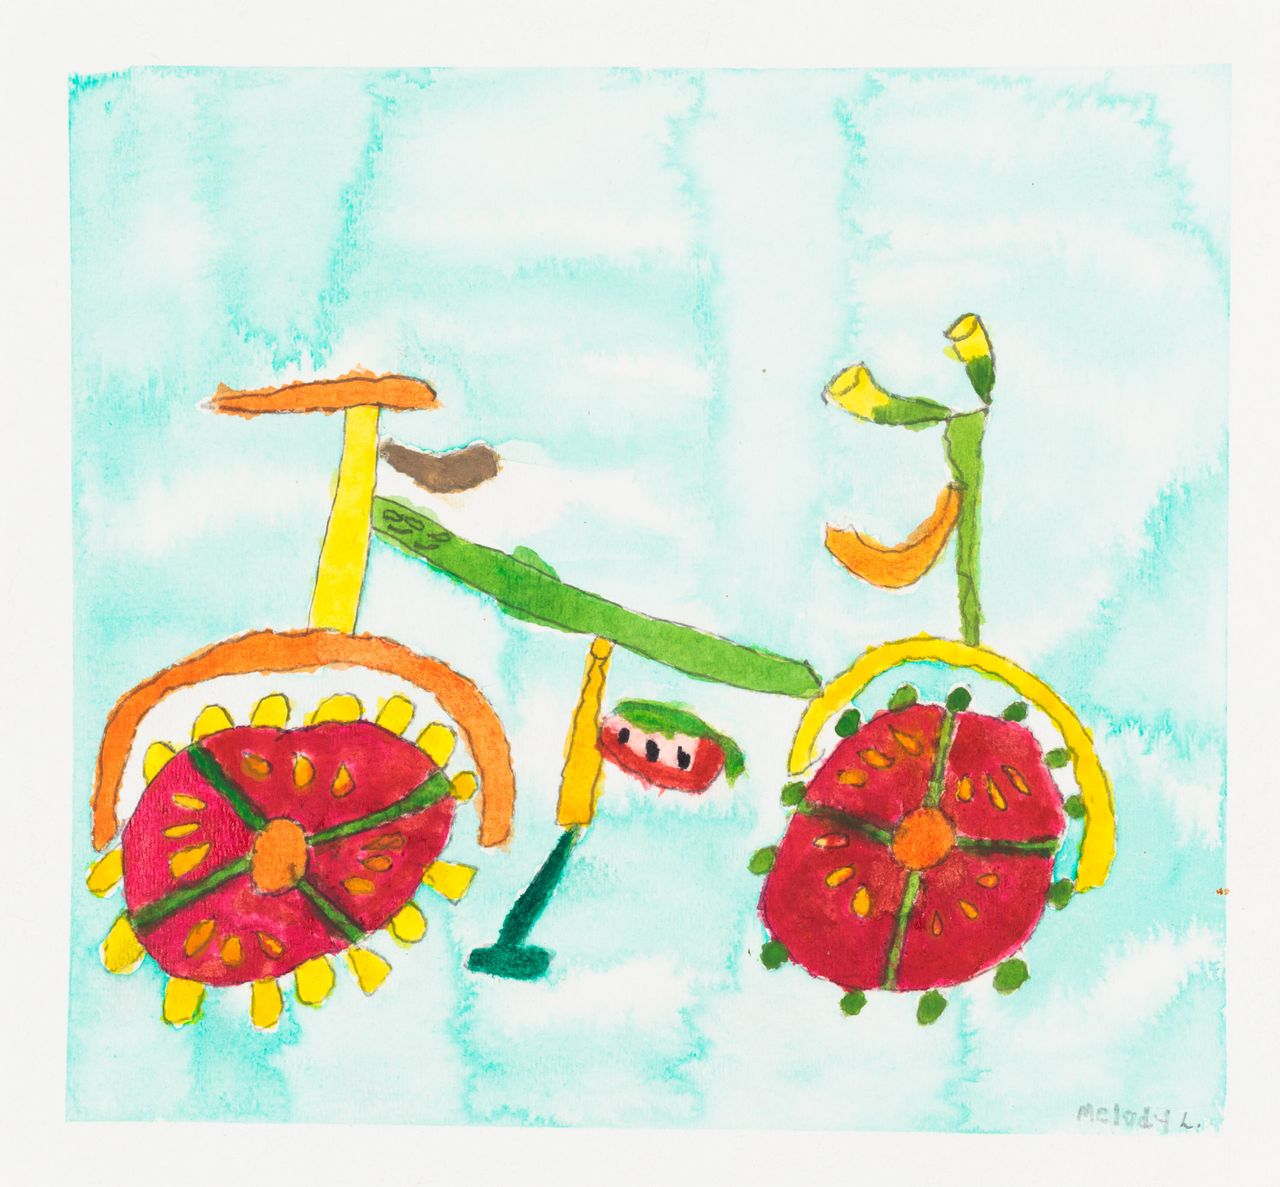 "This is my Bike for Food" by Melody Lima, circa 2006, Creativity Explored Licensing, LLC, watercolor on paper, 10 x 11 inches.